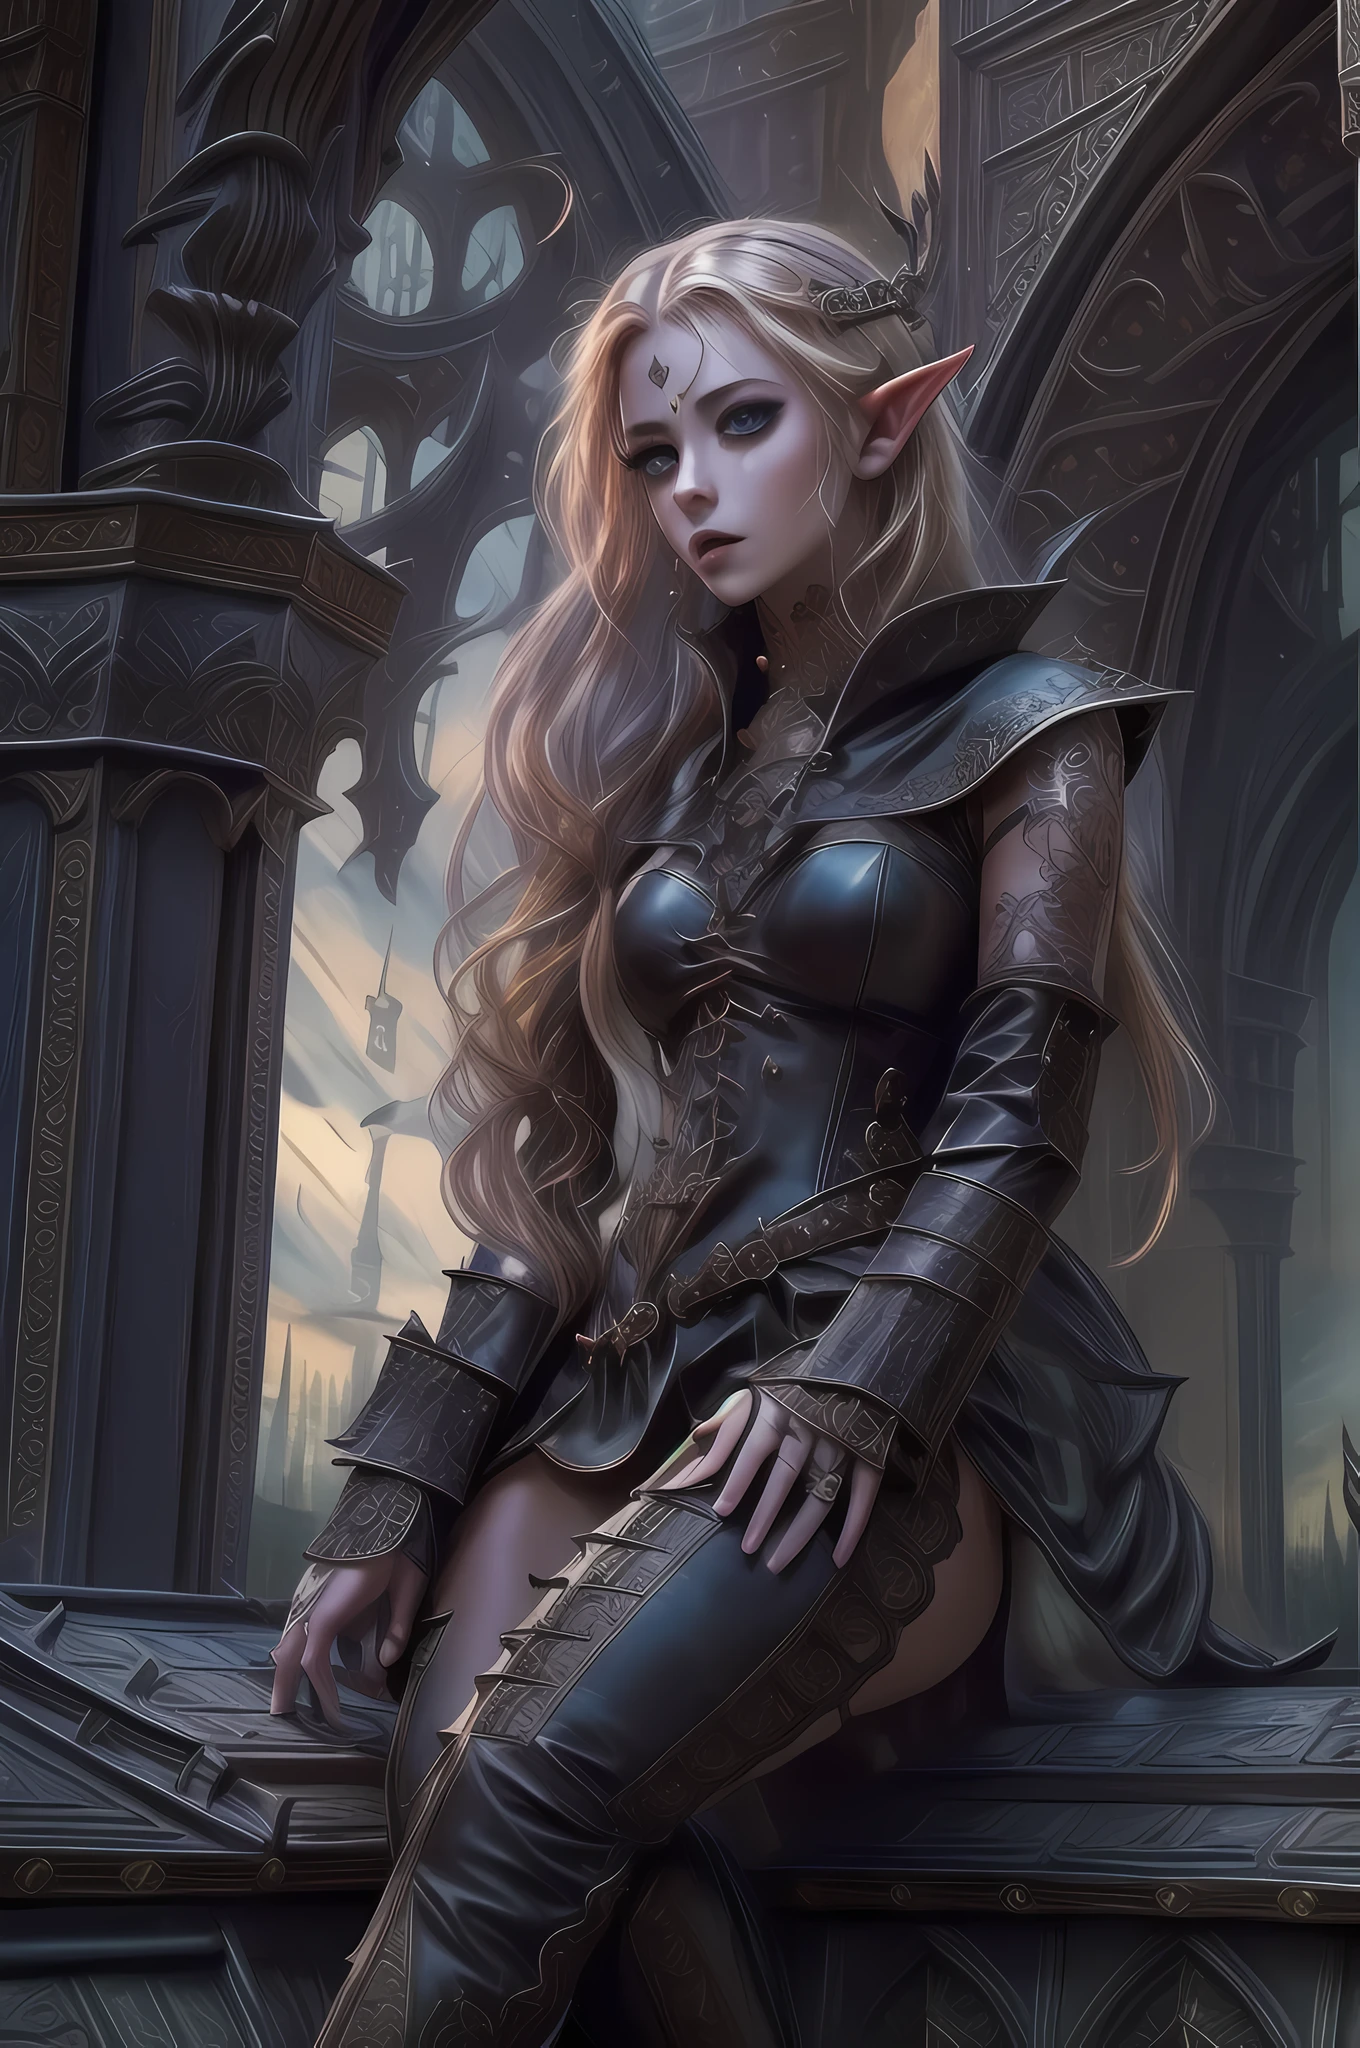 antasy art, d&d art, rpg art, realistic art, goth art, a, high details, best quality, 16k, [ultra detailed], masterpiece, best quality, (extremely detailed), dynamic angle, RAW, photorealistic, a picture of an epic fantasy thief , kneeling on roof top (best details, Masterpiece, best quality: 1.5) on top of a roof in goth fantasy city, ready for action, plenty of buildings, a temple (best details, Masterpiece, best quality: 1.5), female elf (best details, Masterpiece, best quality: 1.5), epic fantasy thief, [[anatomically correct]], blond hair, braided hair, fair skin, intense bright eyes, armed with dagger, dynamic position (intricate details, Masterpiece, best quality: 1.5), small pointed ears, dark armor, full leather armor (intricate details, Masterpiece, best quality: 1.5), tense atmosphere, night, stars light, moon light, moon rays, stars, best details, best quality, highres, ultra wide angle, drkfntasy night over the roof top of a goth church, the elf watches the city below, it is ready to act, medieval city background